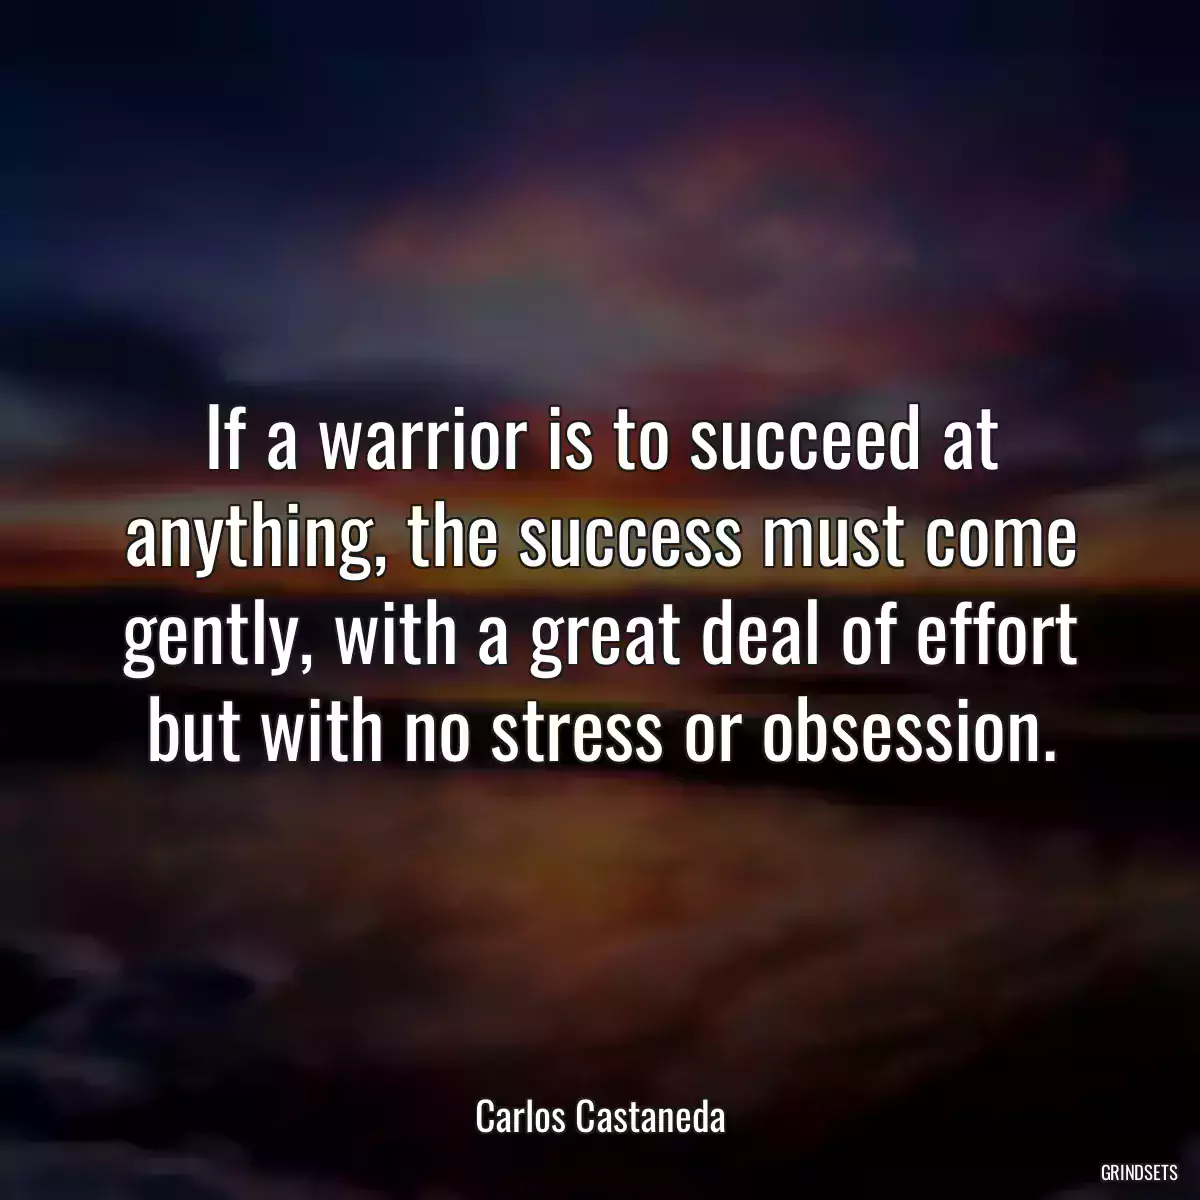 If a warrior is to succeed at anything, the success must come gently, with a great deal of effort but with no stress or obsession.